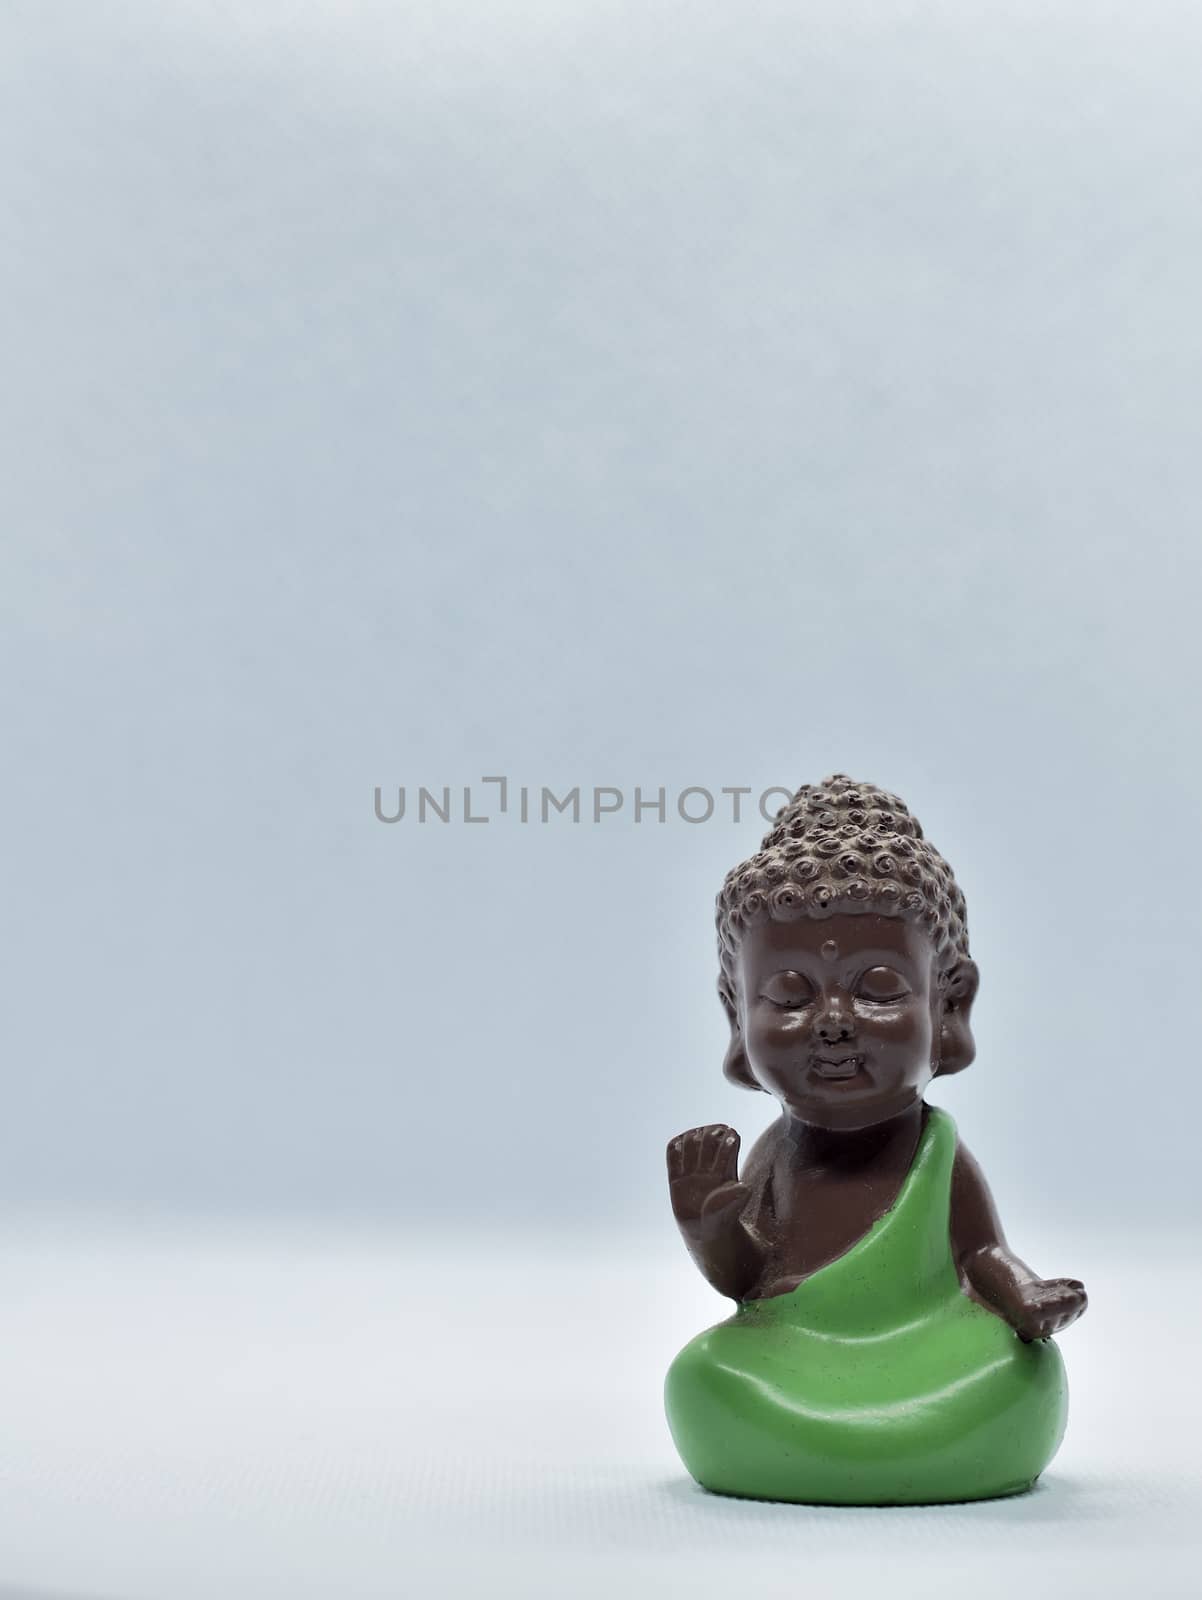 Chinese traditional little monk figure four by rkbalaji